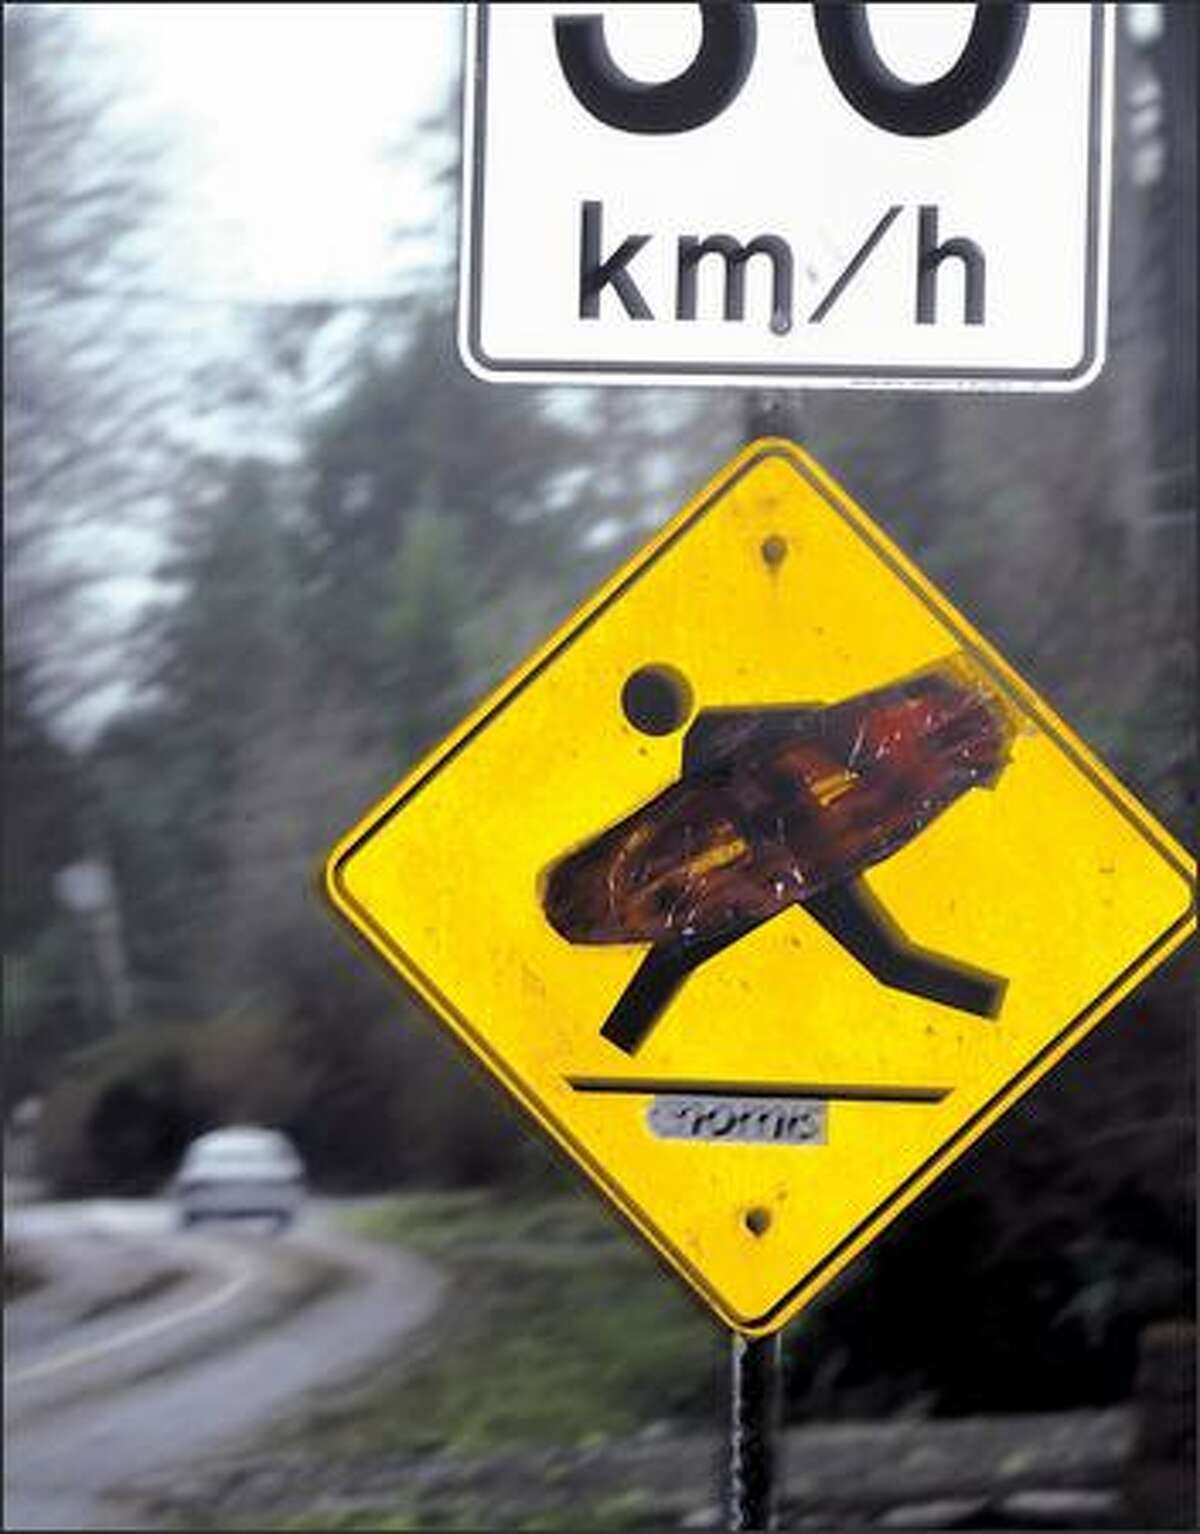 A street sign reflects the surfing culture of Tofino, B.C.